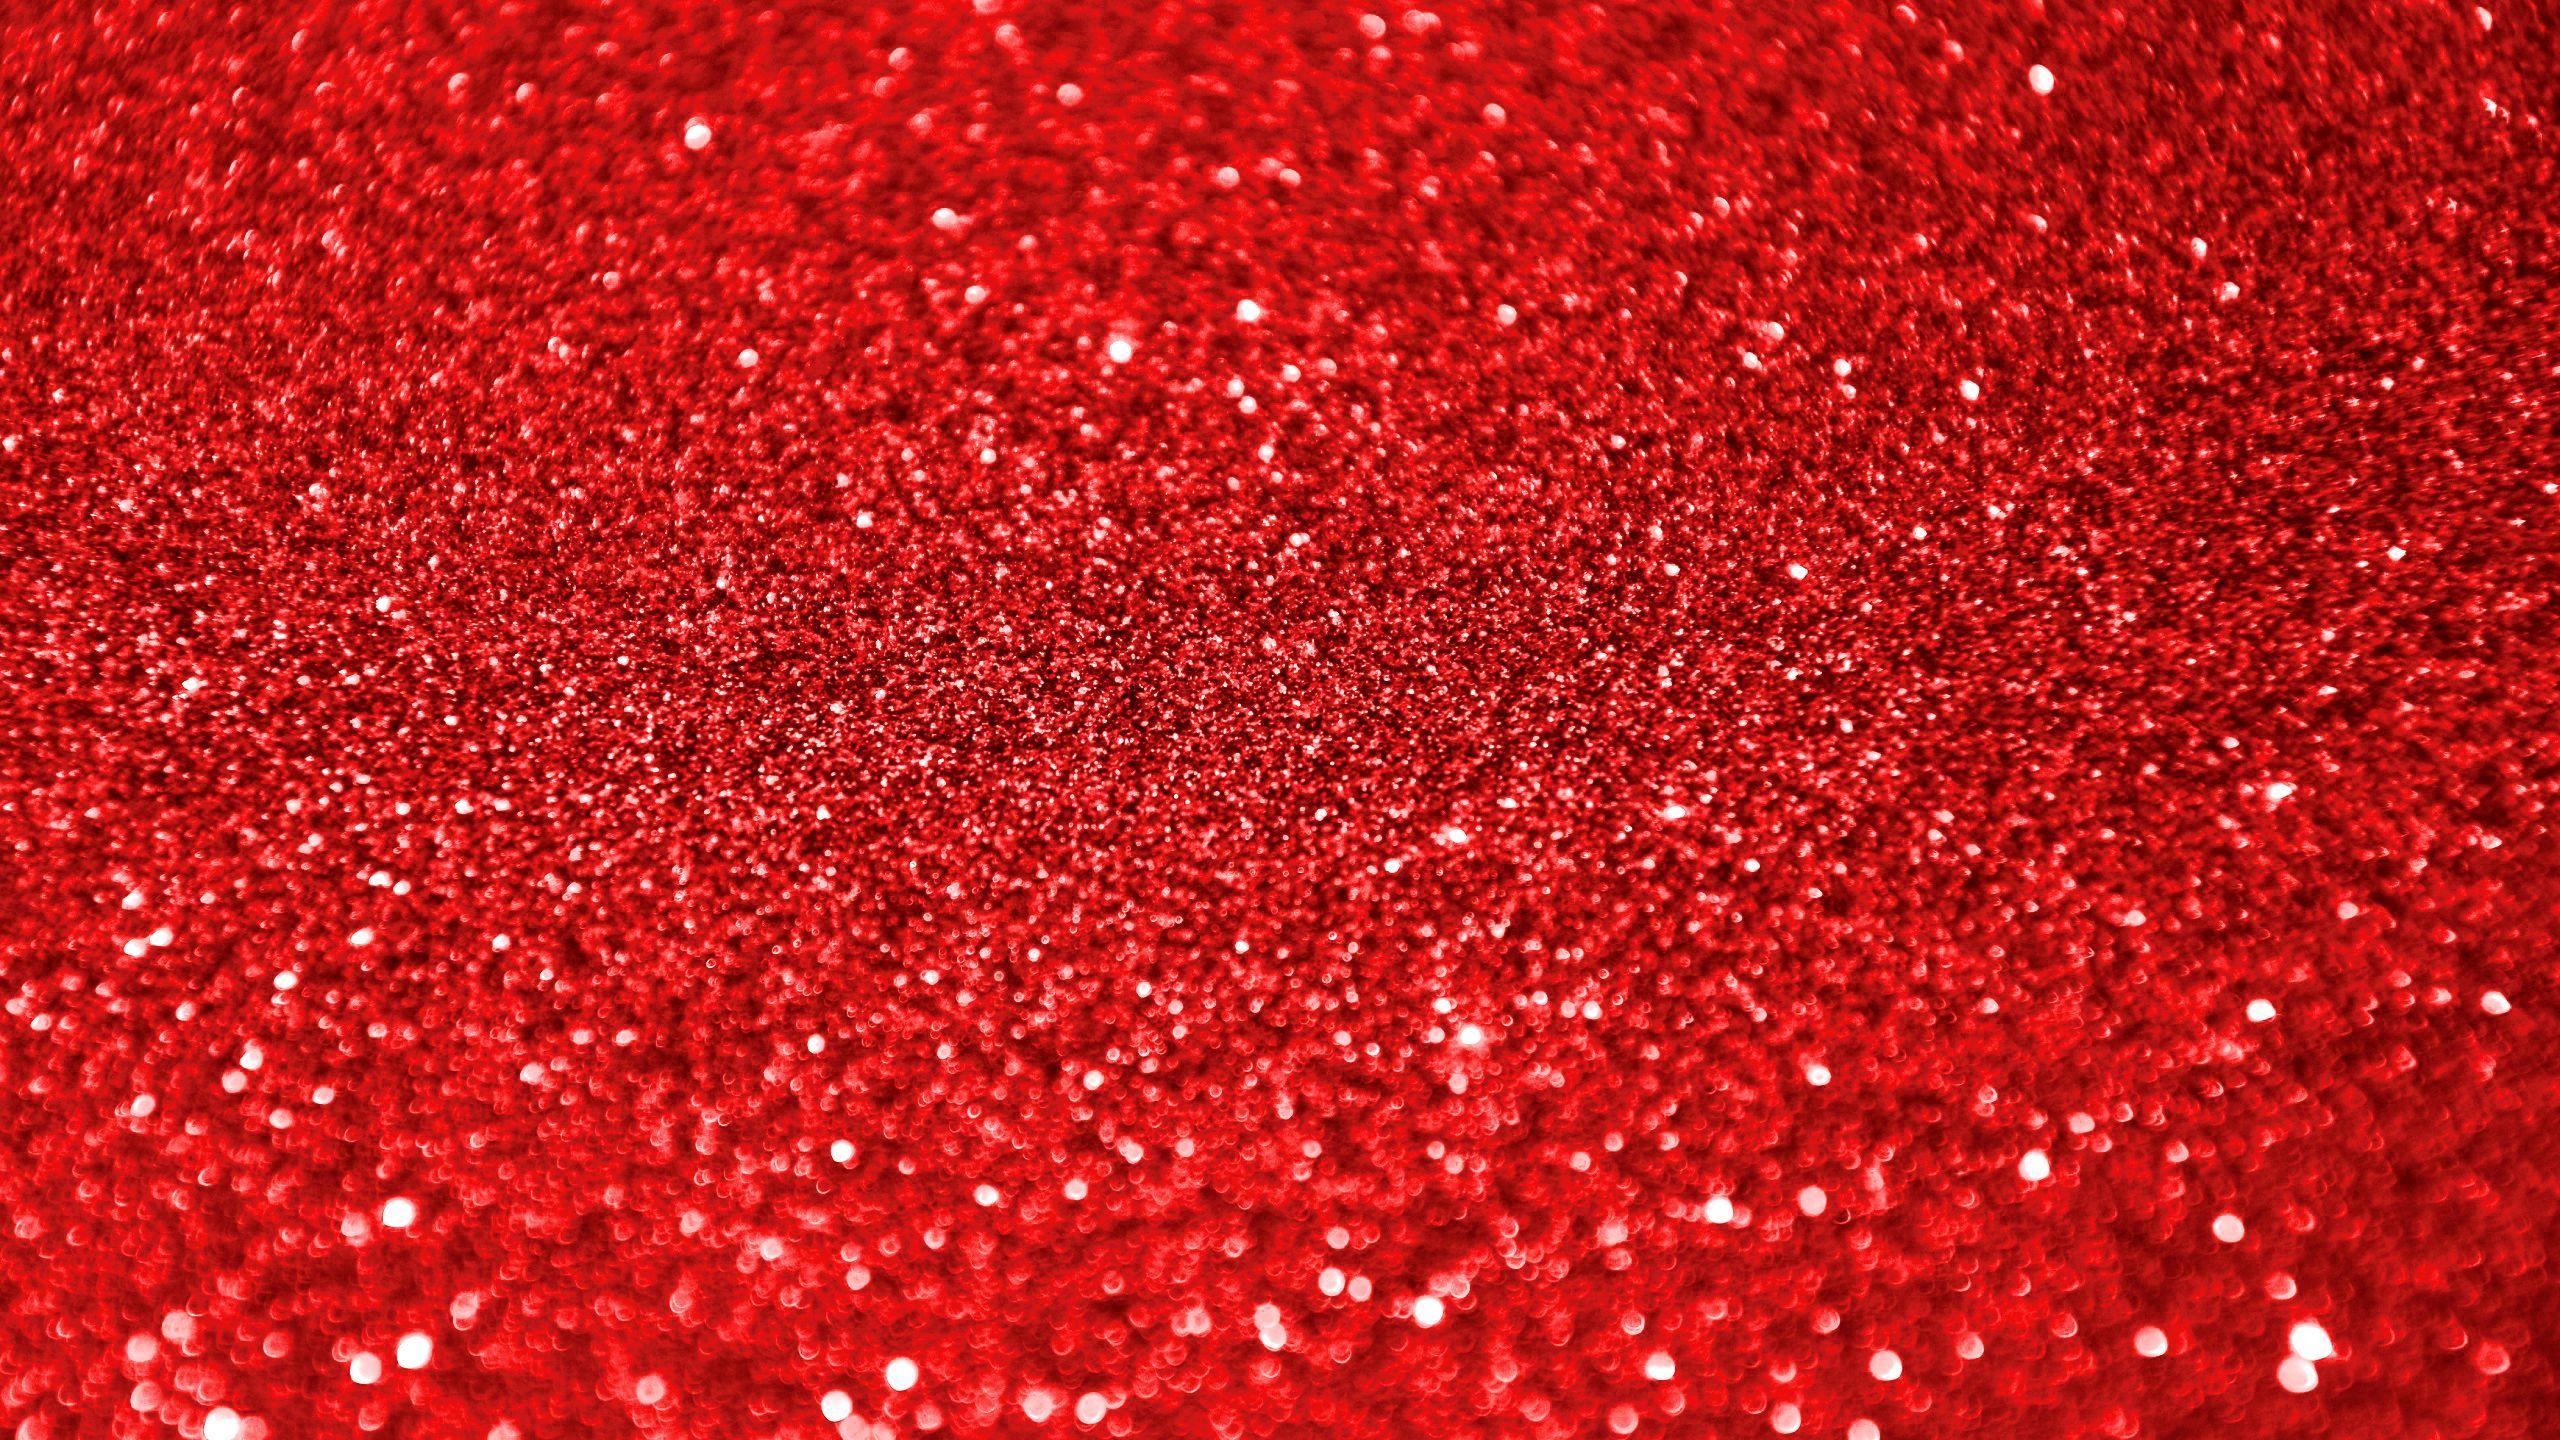 sparkle wallpaper for home